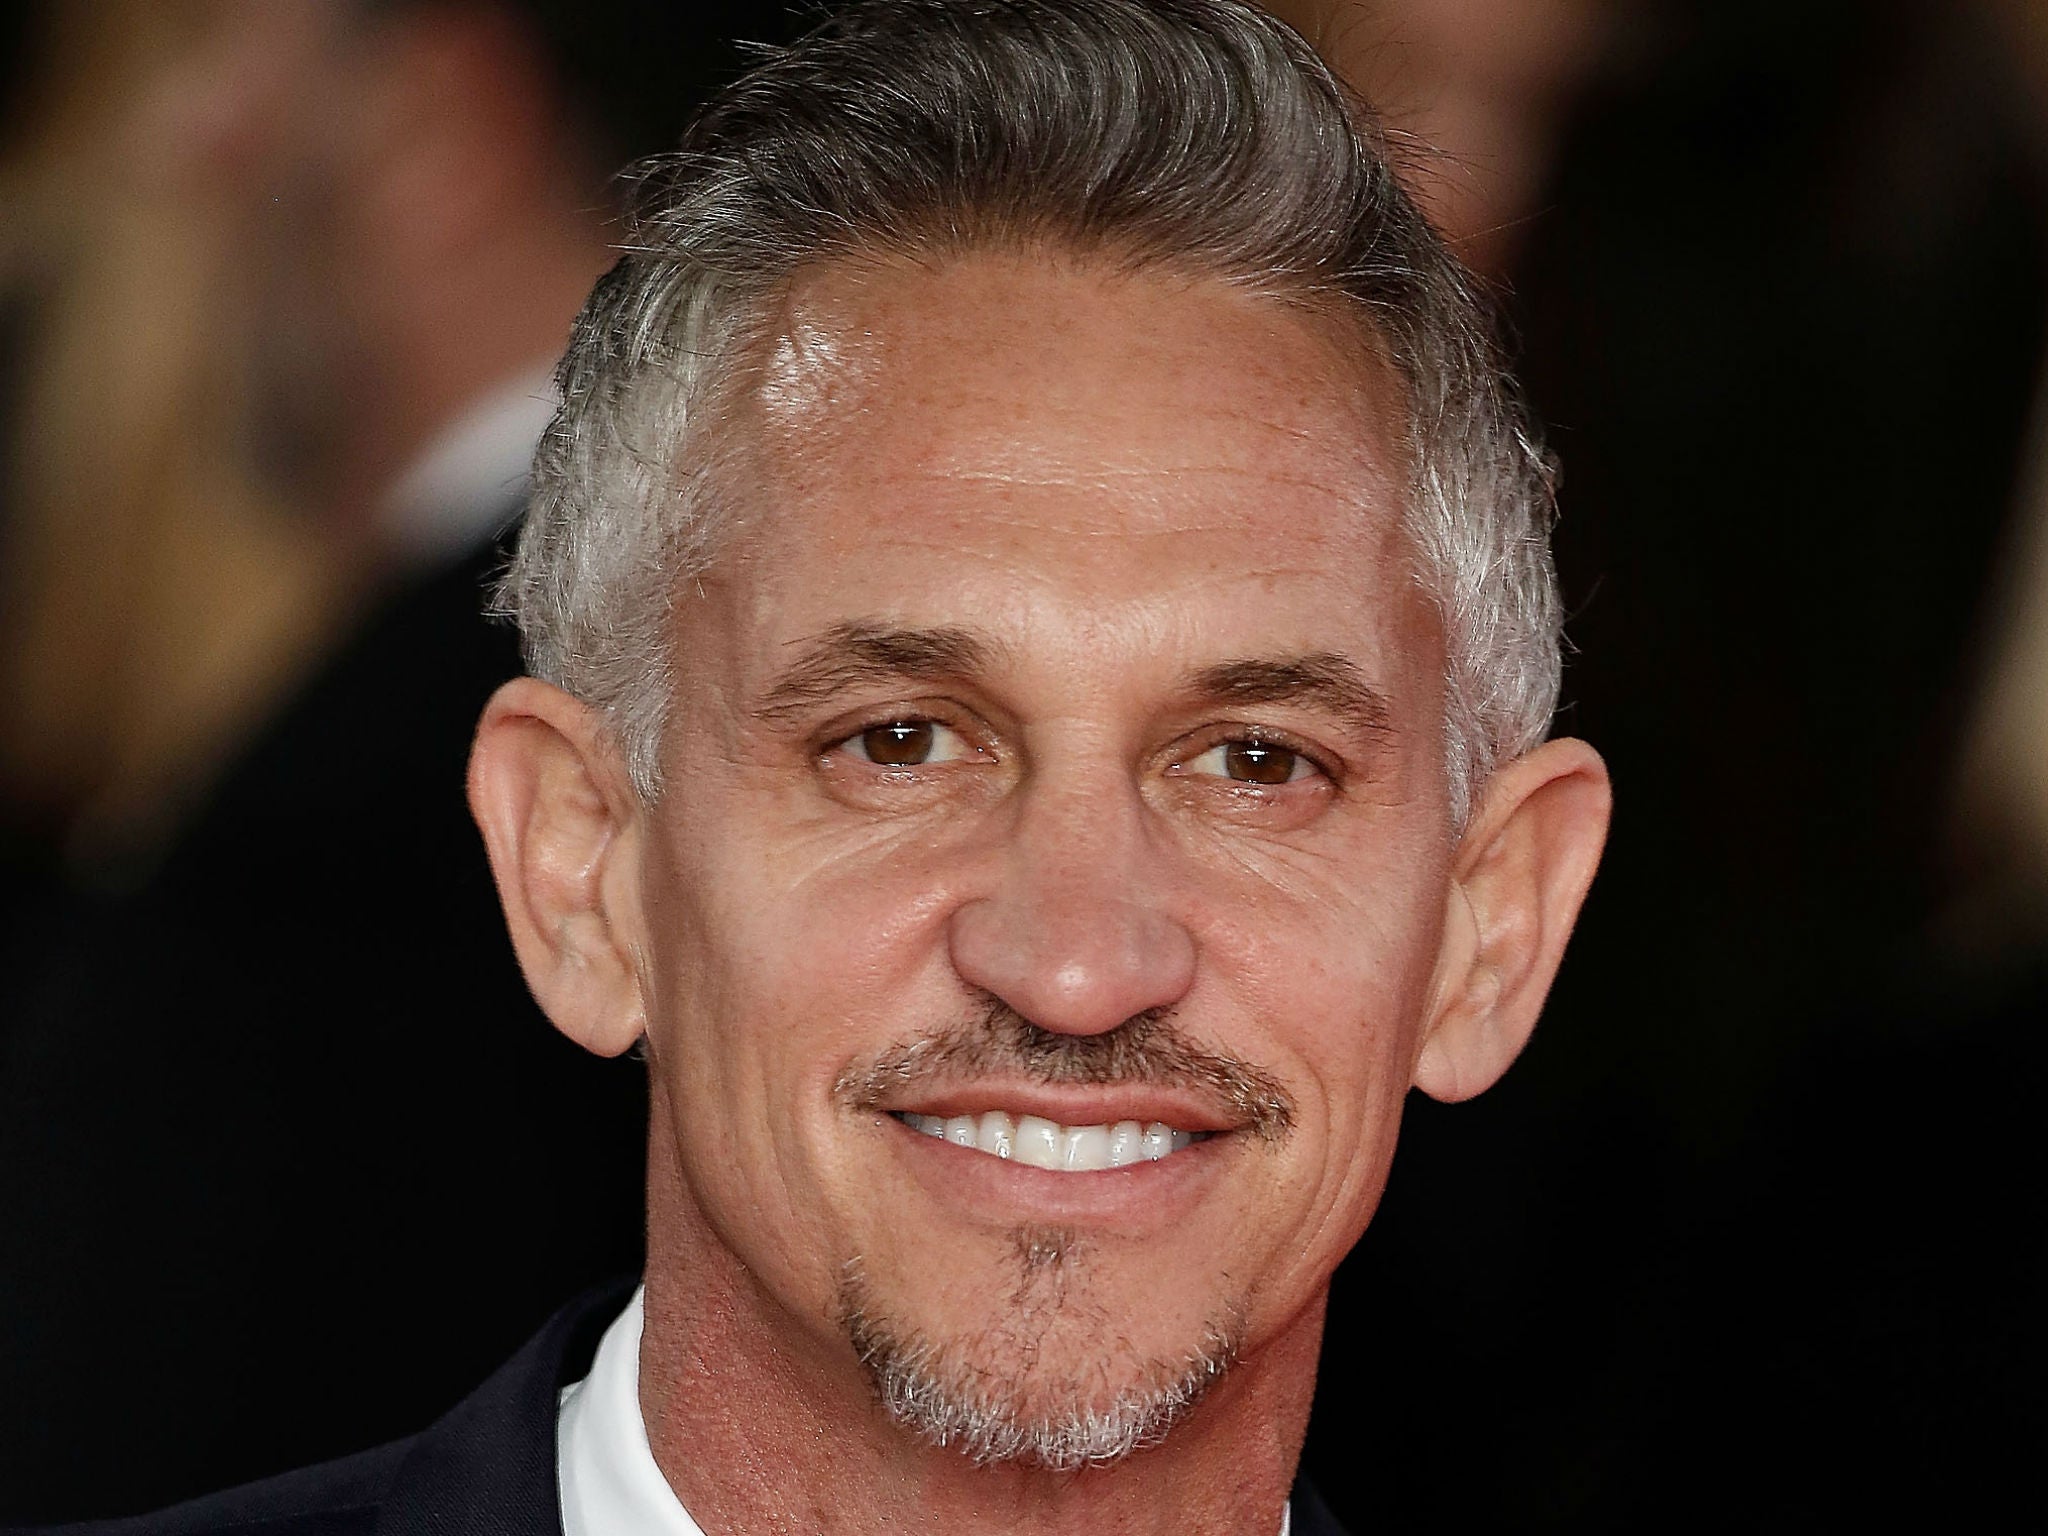 The Sun previously called Lineker a "jug-eared leftie luvvie" and demanded the BBC sack him